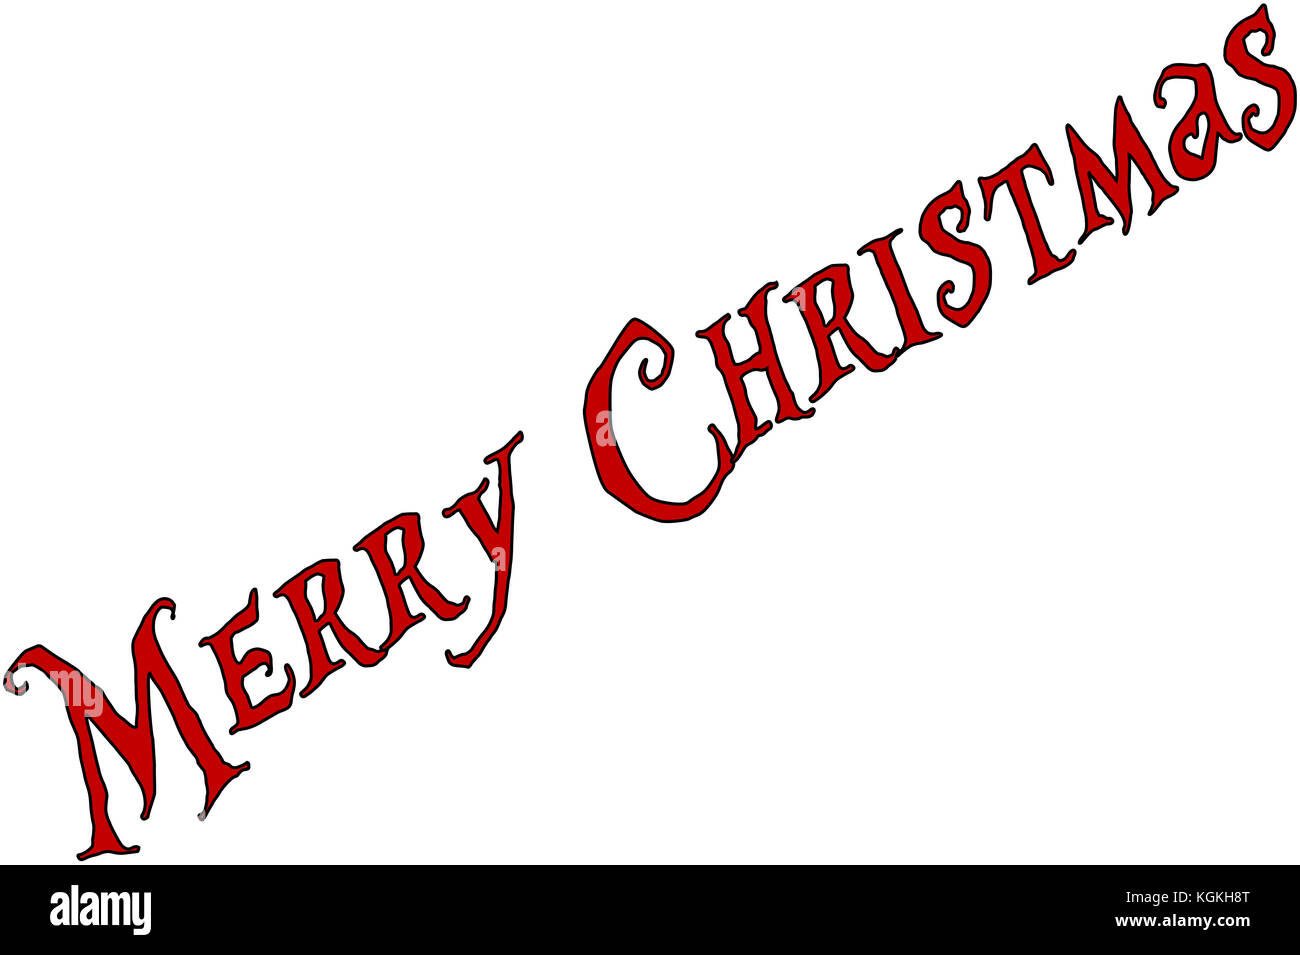 Merry Christmas text sign illustration writen in English on a white  Background Stock Photo